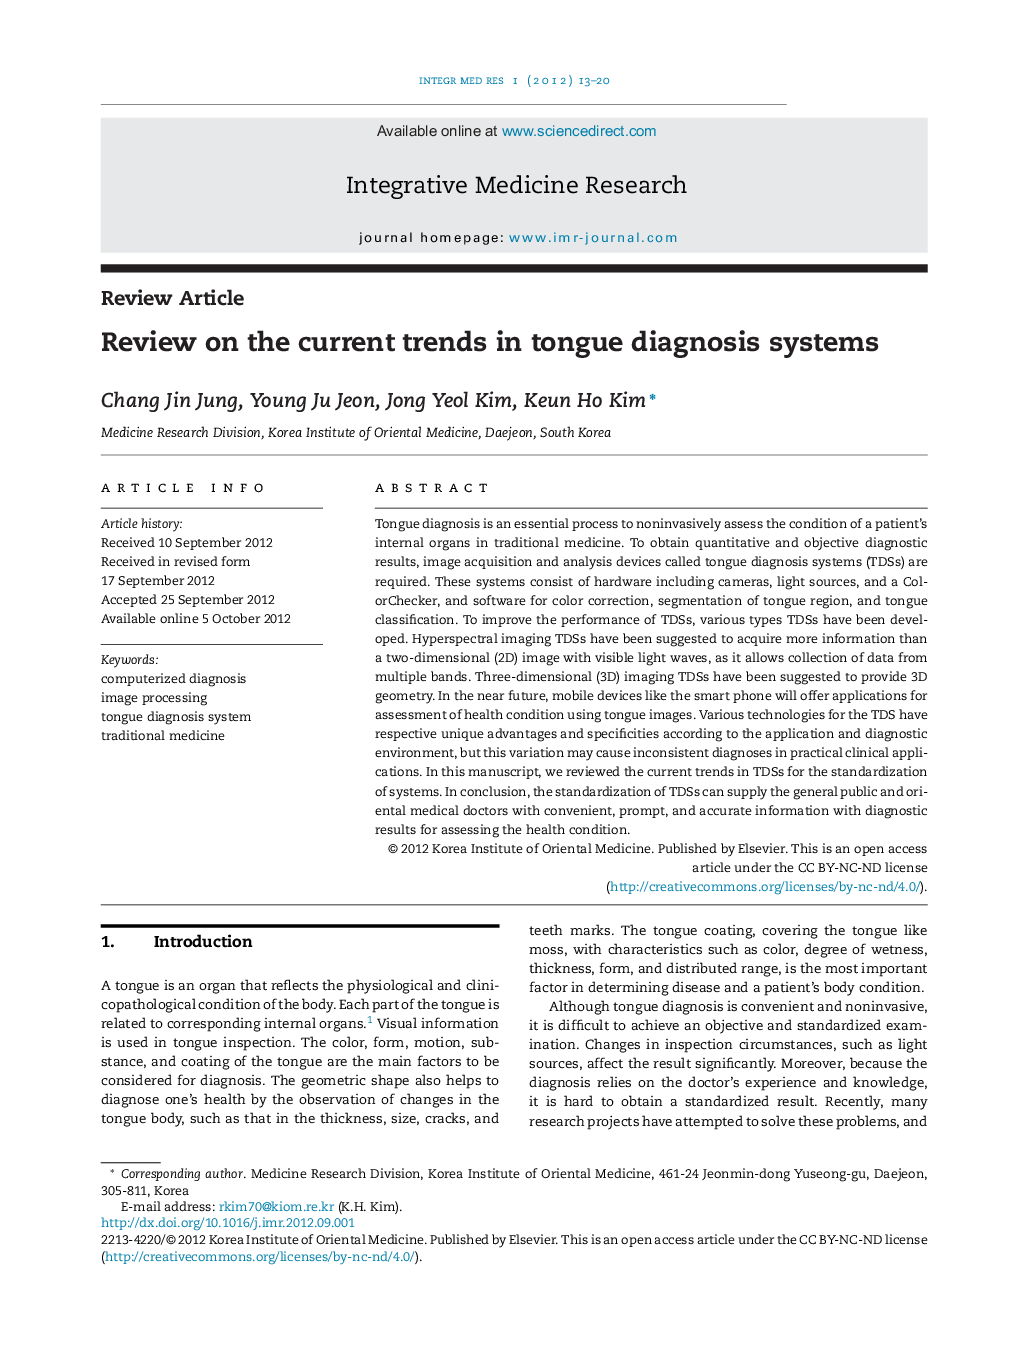 Review on the current trends in tongue diagnosis systems